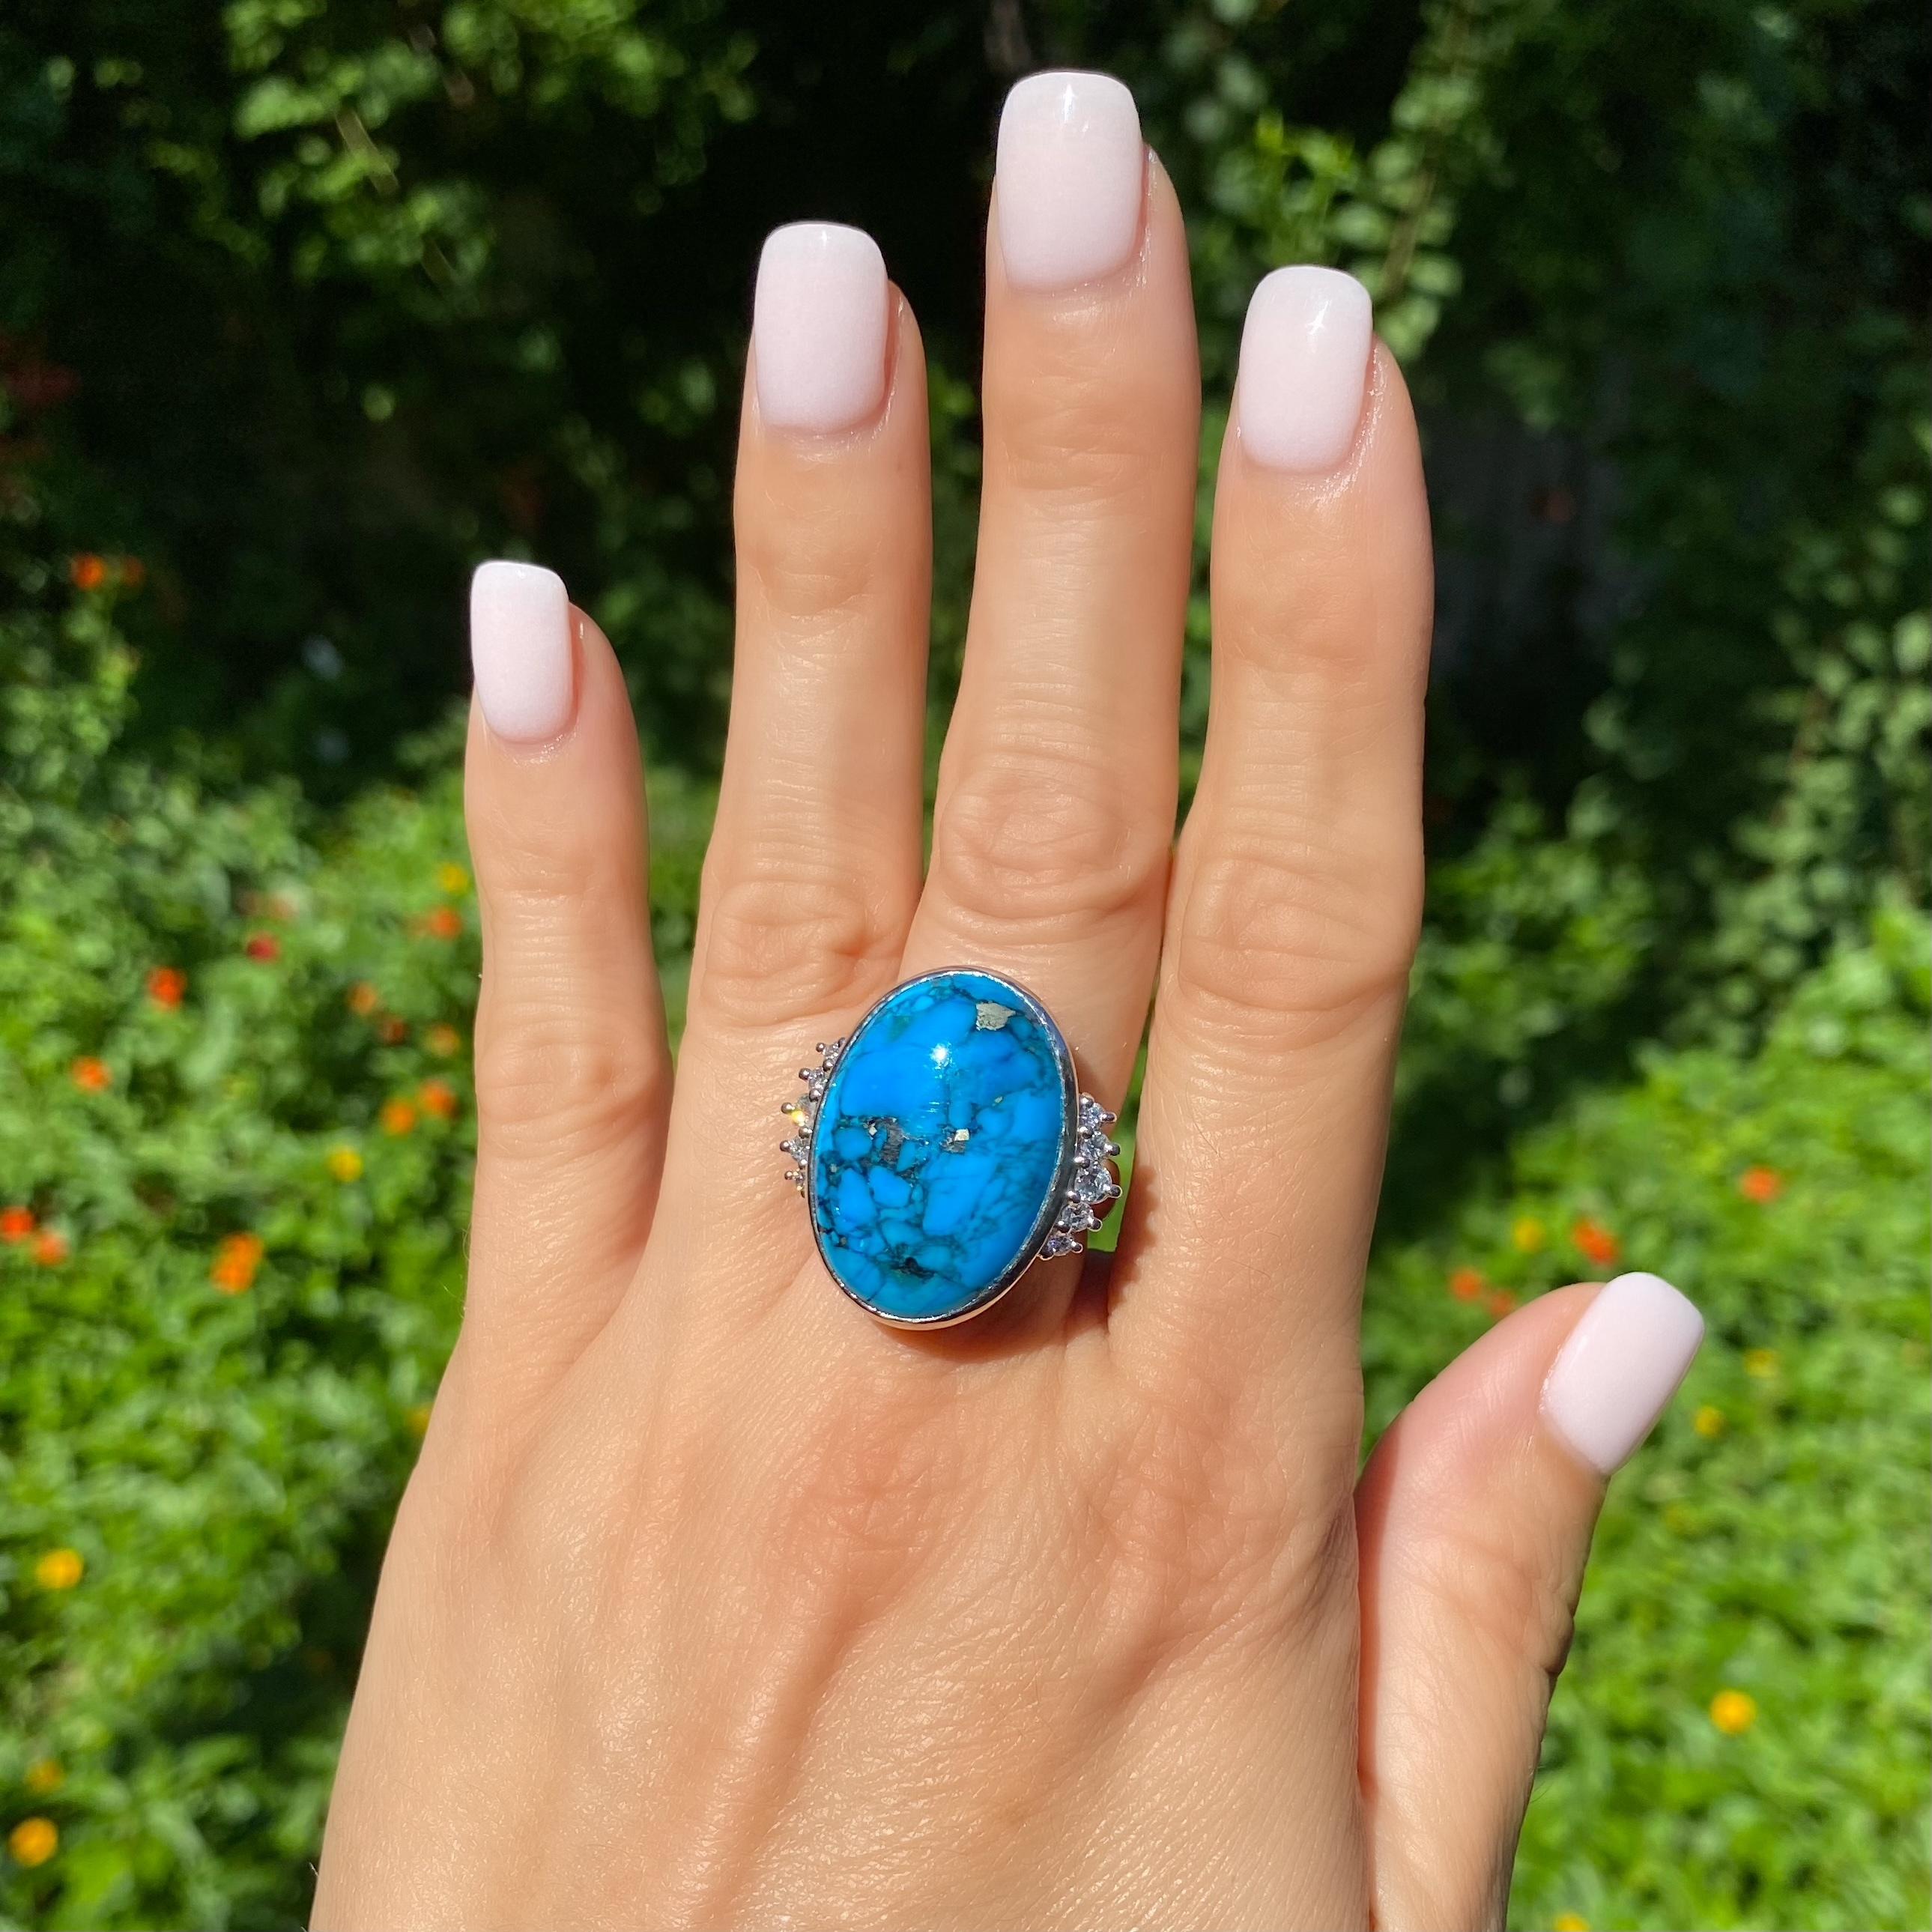 Beautiful Spiderweb Blue Turquoise and Diamond Ring, centering a securely nestled oval 16.13 Carat Turquoise with Natural Pyrite in the Turquoise, enhanced on either side with Hand Set Diamonds, approx. 0.45tcw. Hand crafted Platinum mounting.